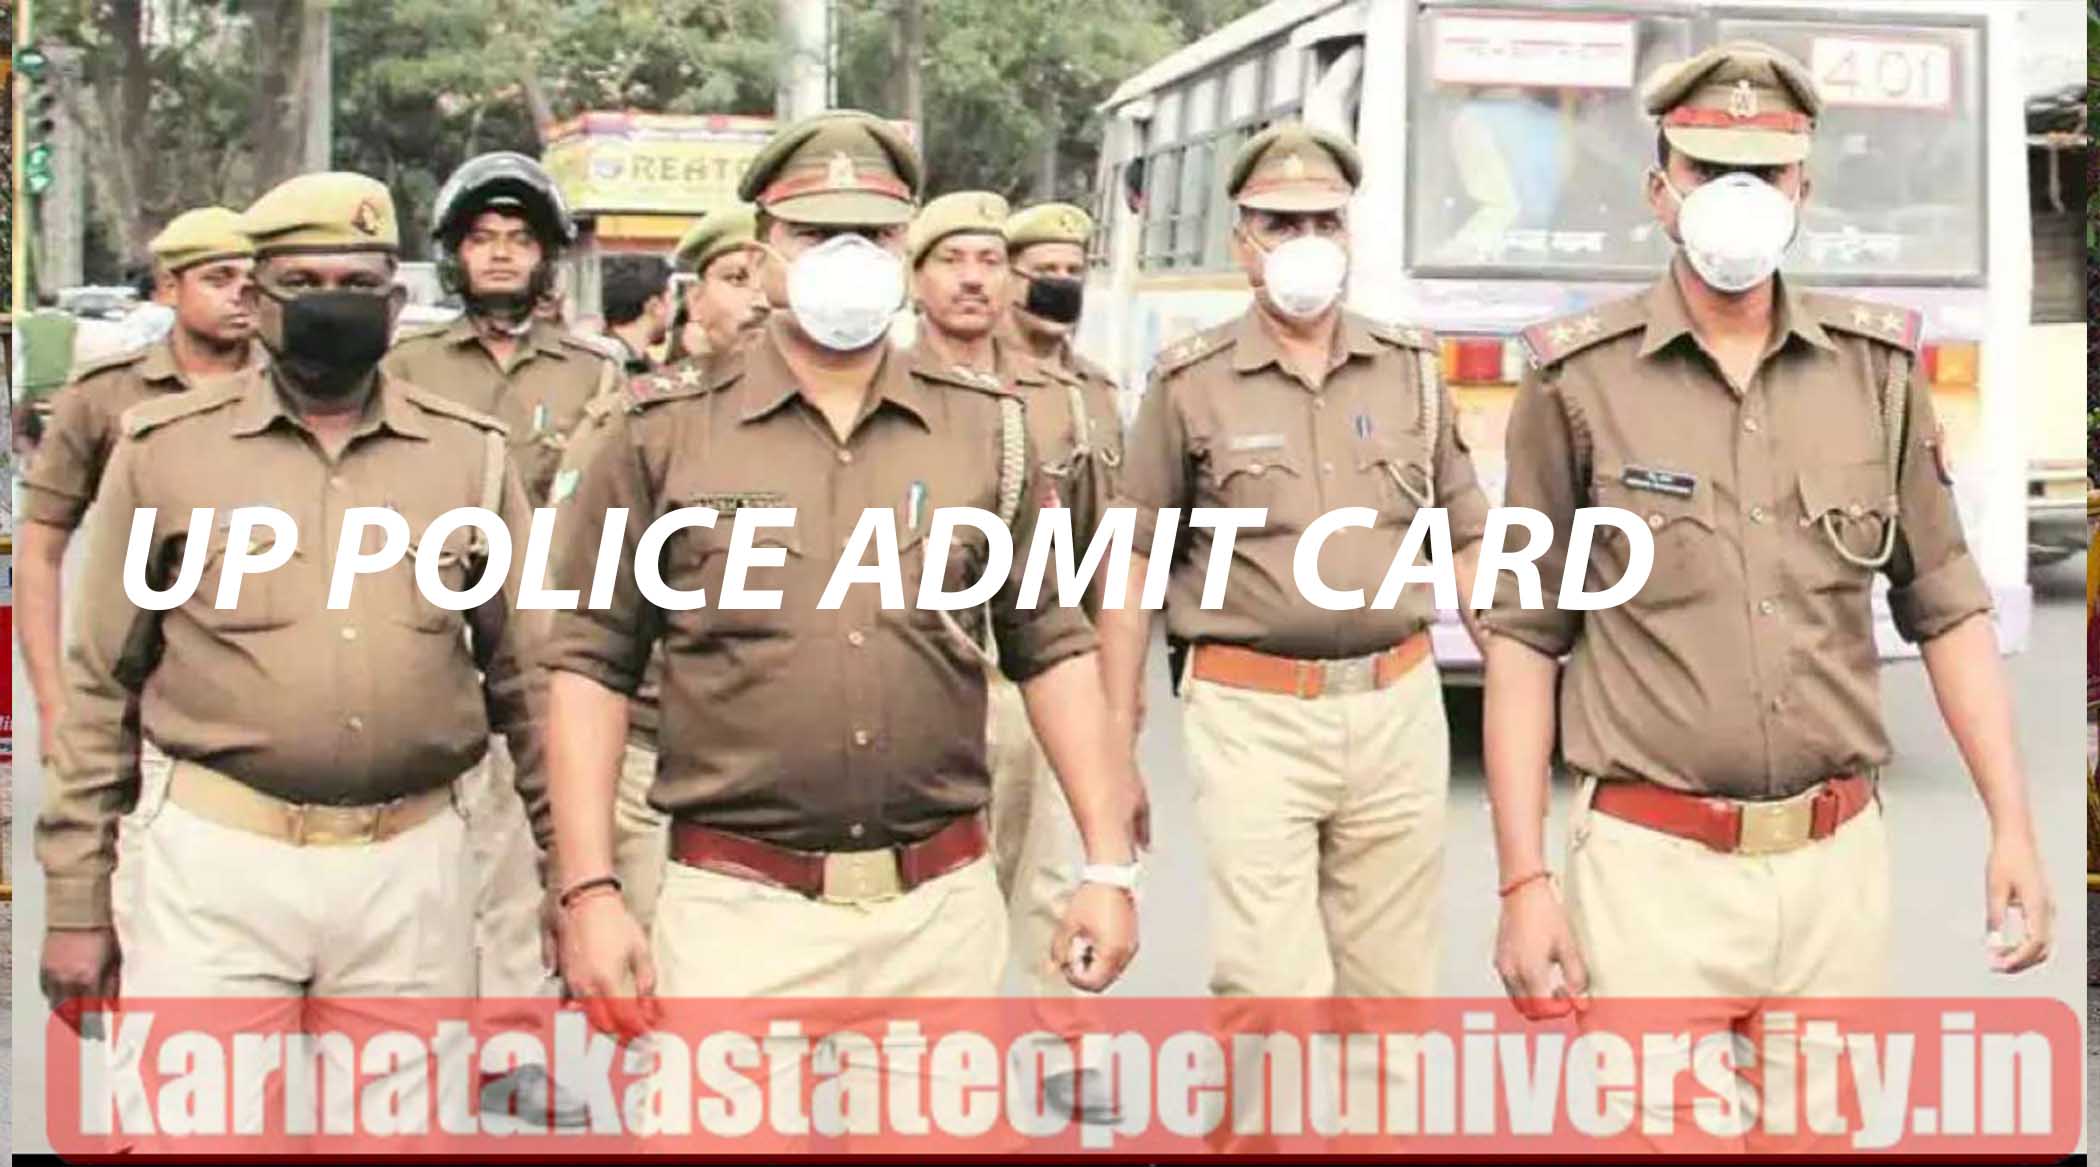 UP POLICE ADMIT CARD